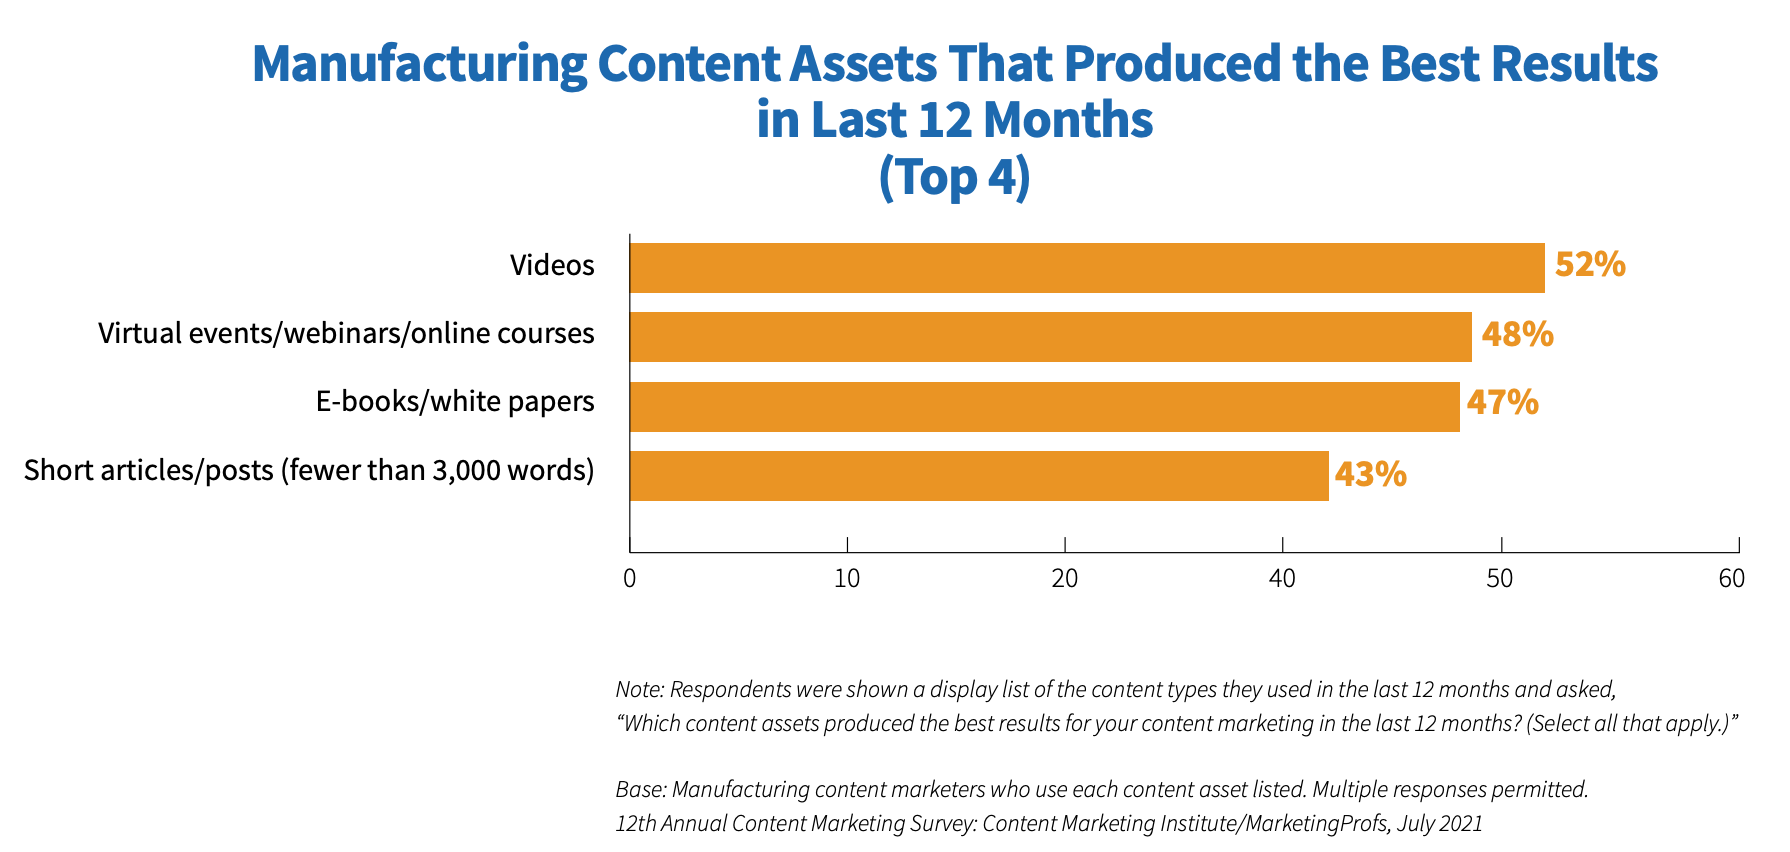 Mfg content assets that produced best results